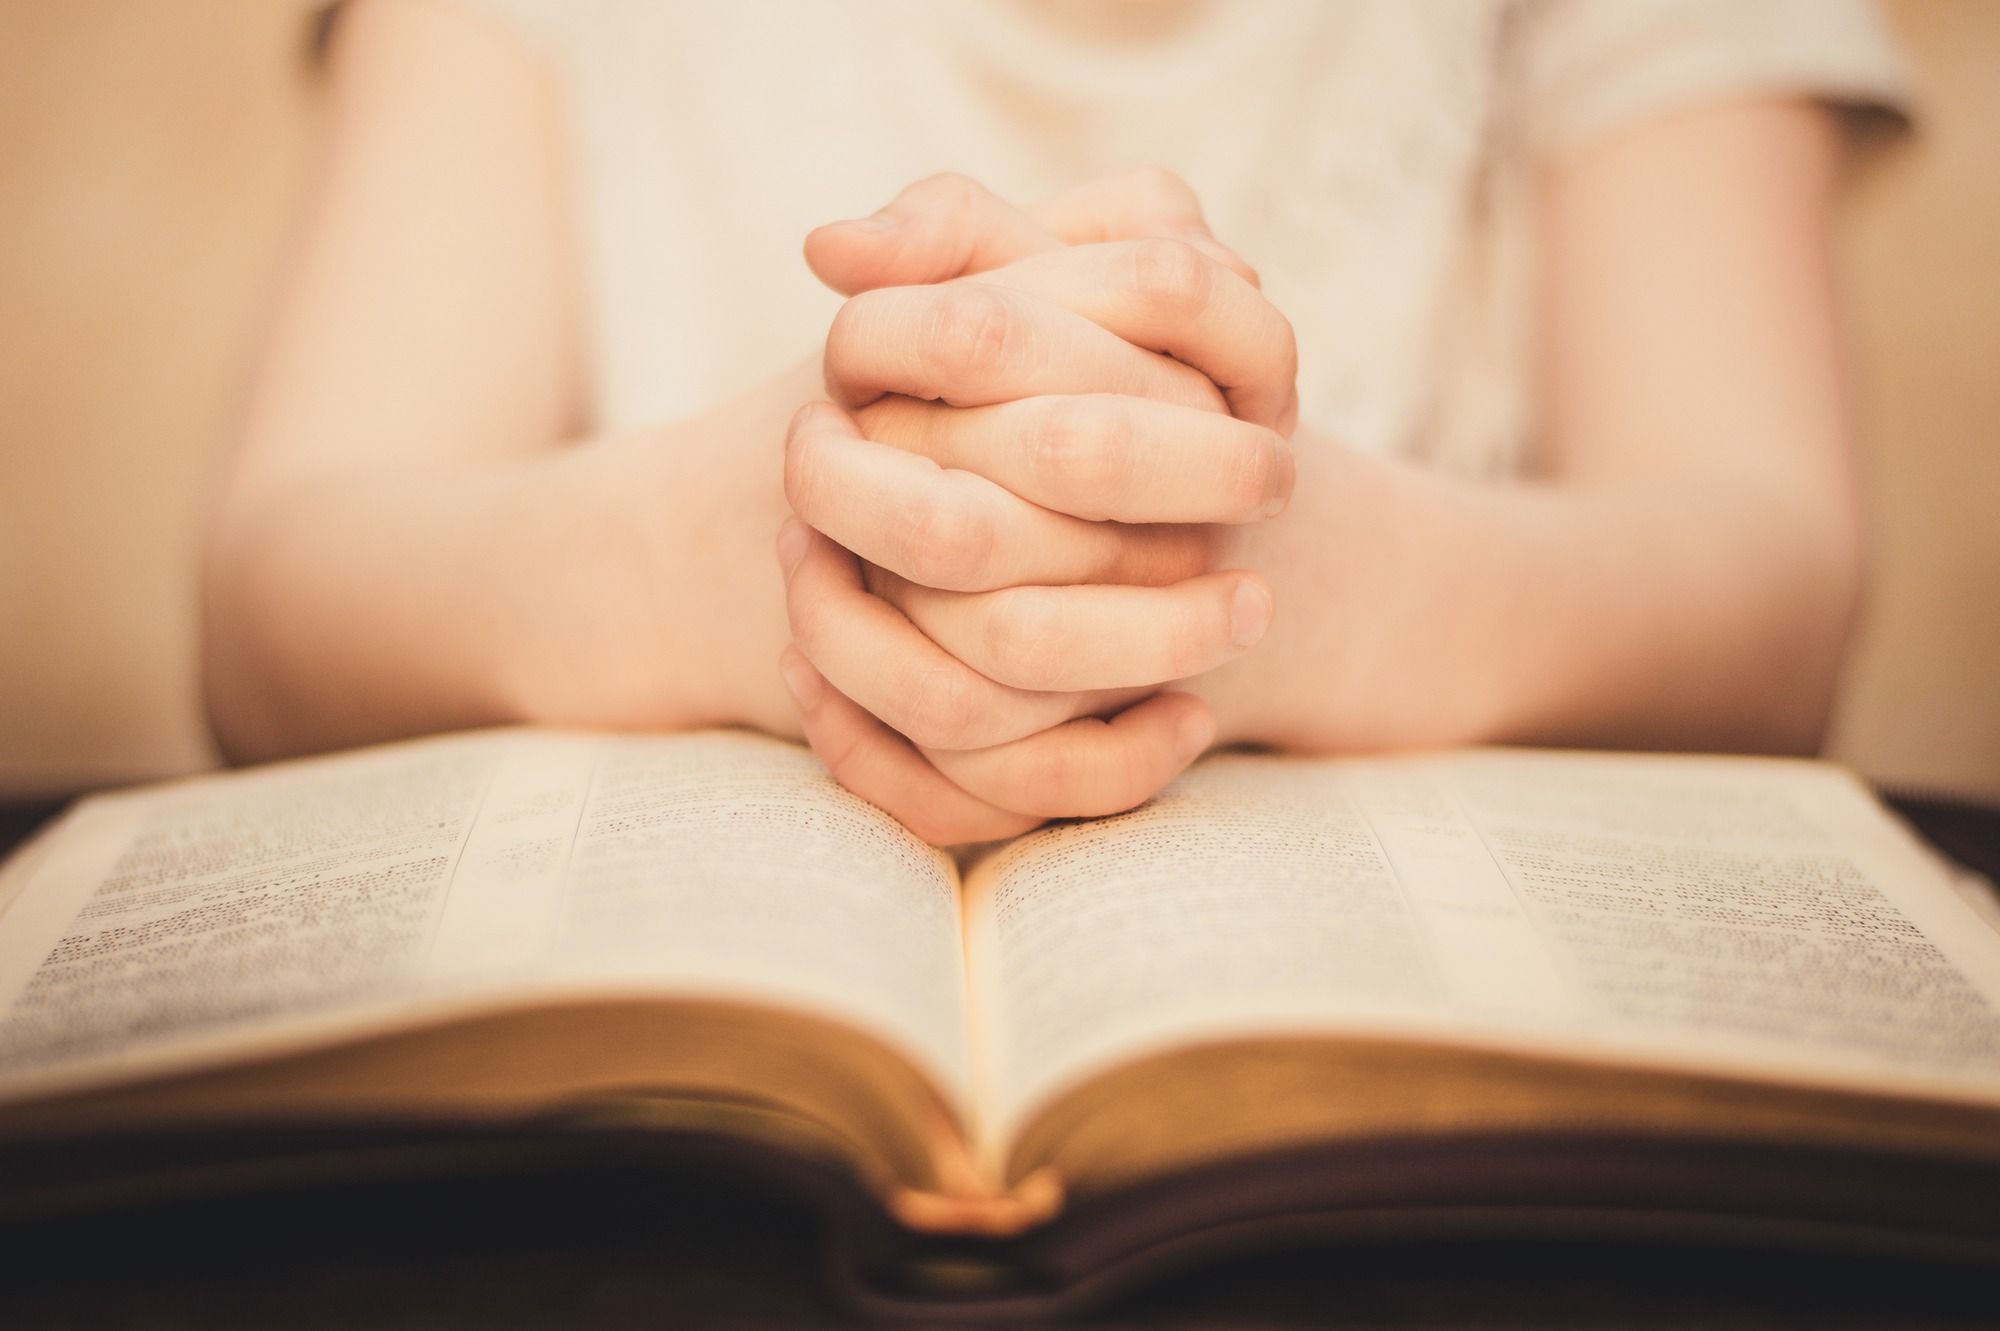 Closeup of young girl's clasped hands on open Bible